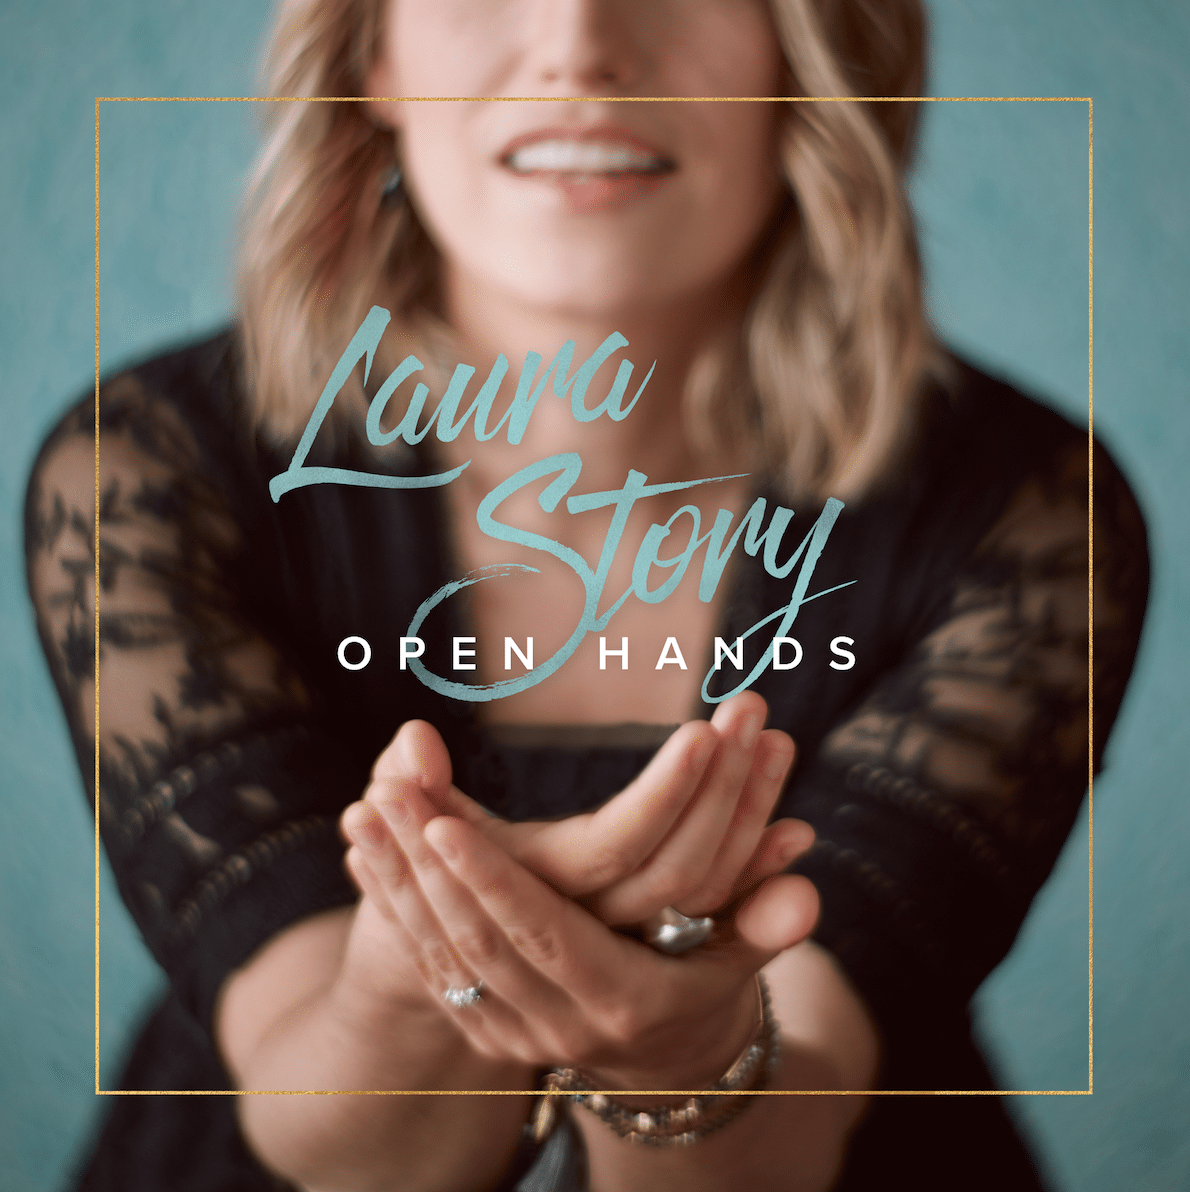 <em>Hear Laura Story sing songs from her new project Open Hands and old favorites, March 9 at Shades Mountain Baptist. Her new project is available for purchase at Sanctuary Christian Books and Gifts in Alabaster beginning March 3.</em>